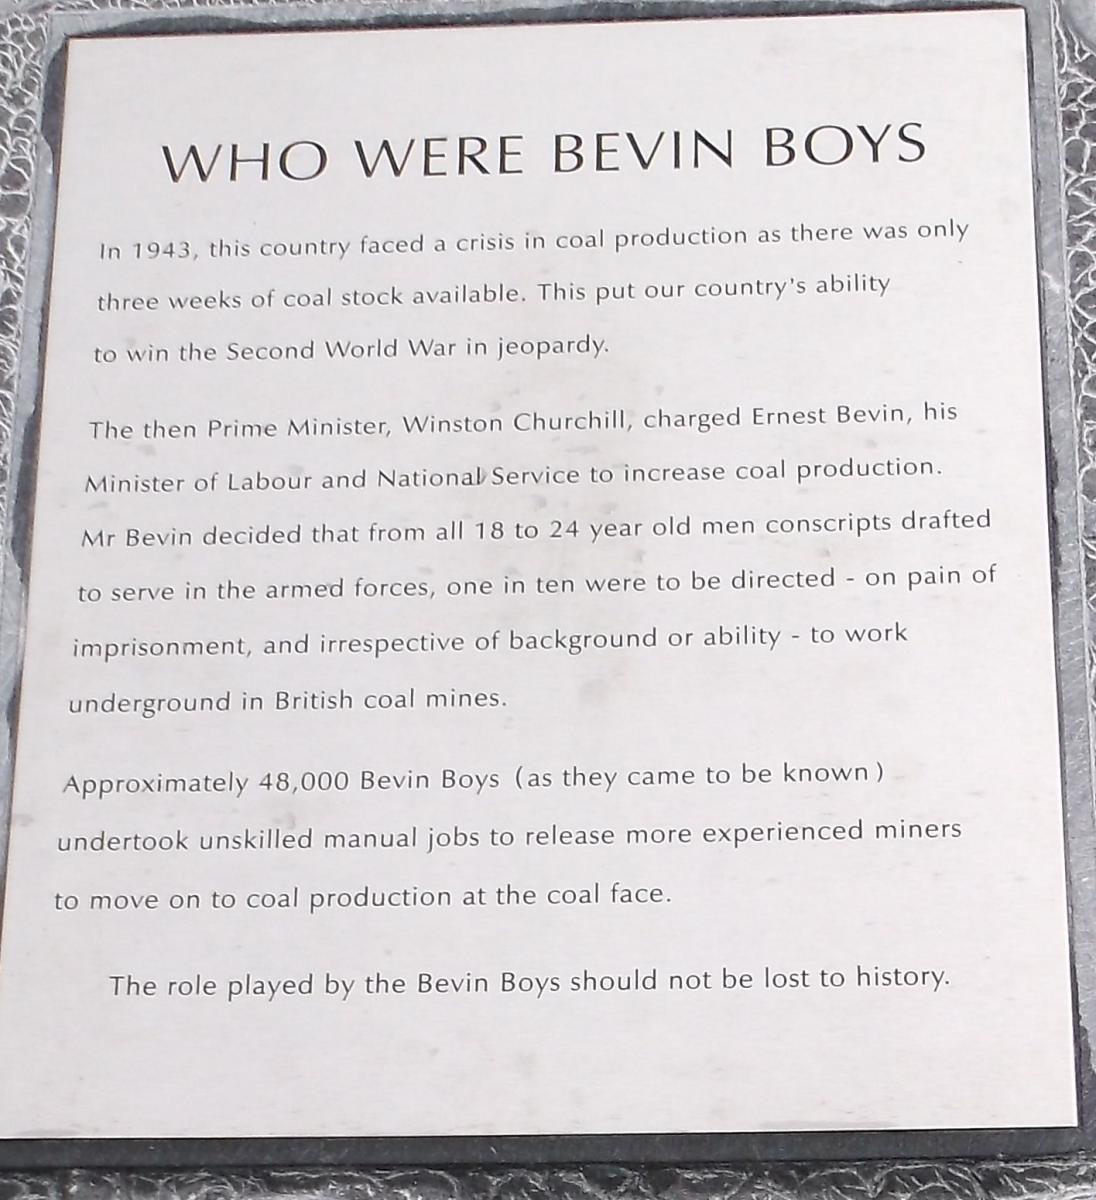 Just who were the Bevin Boys?